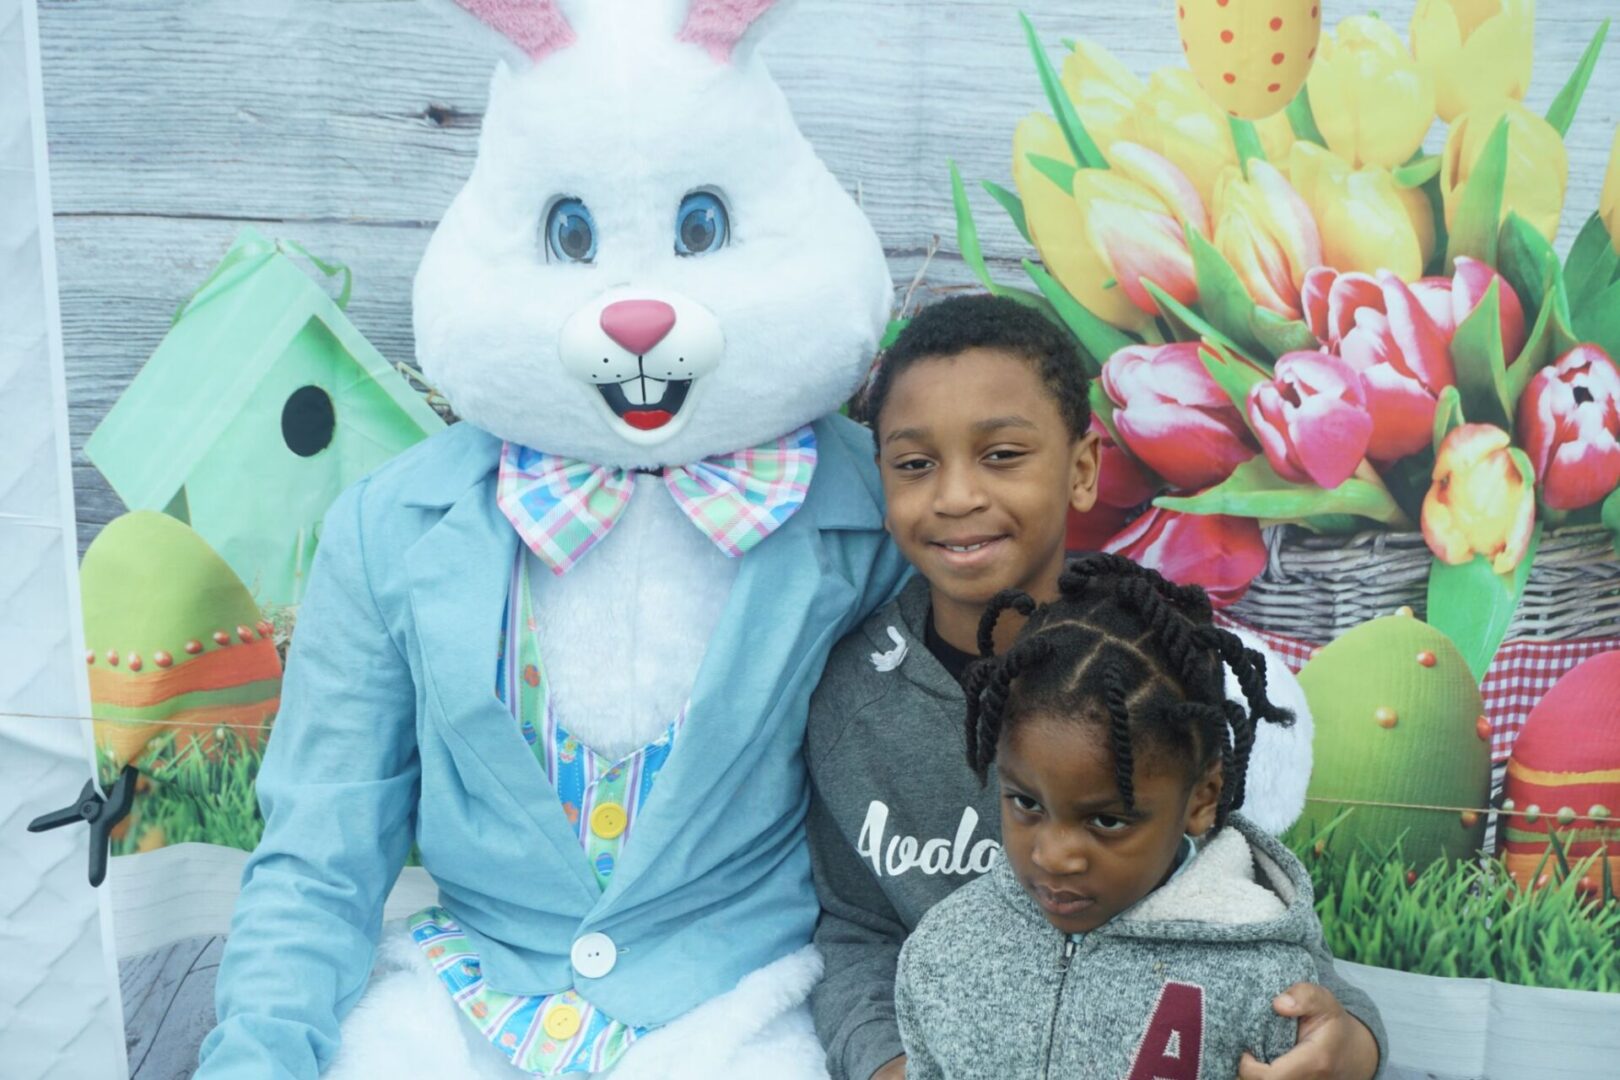 The bunny mascot and two kids wearing gray jackets